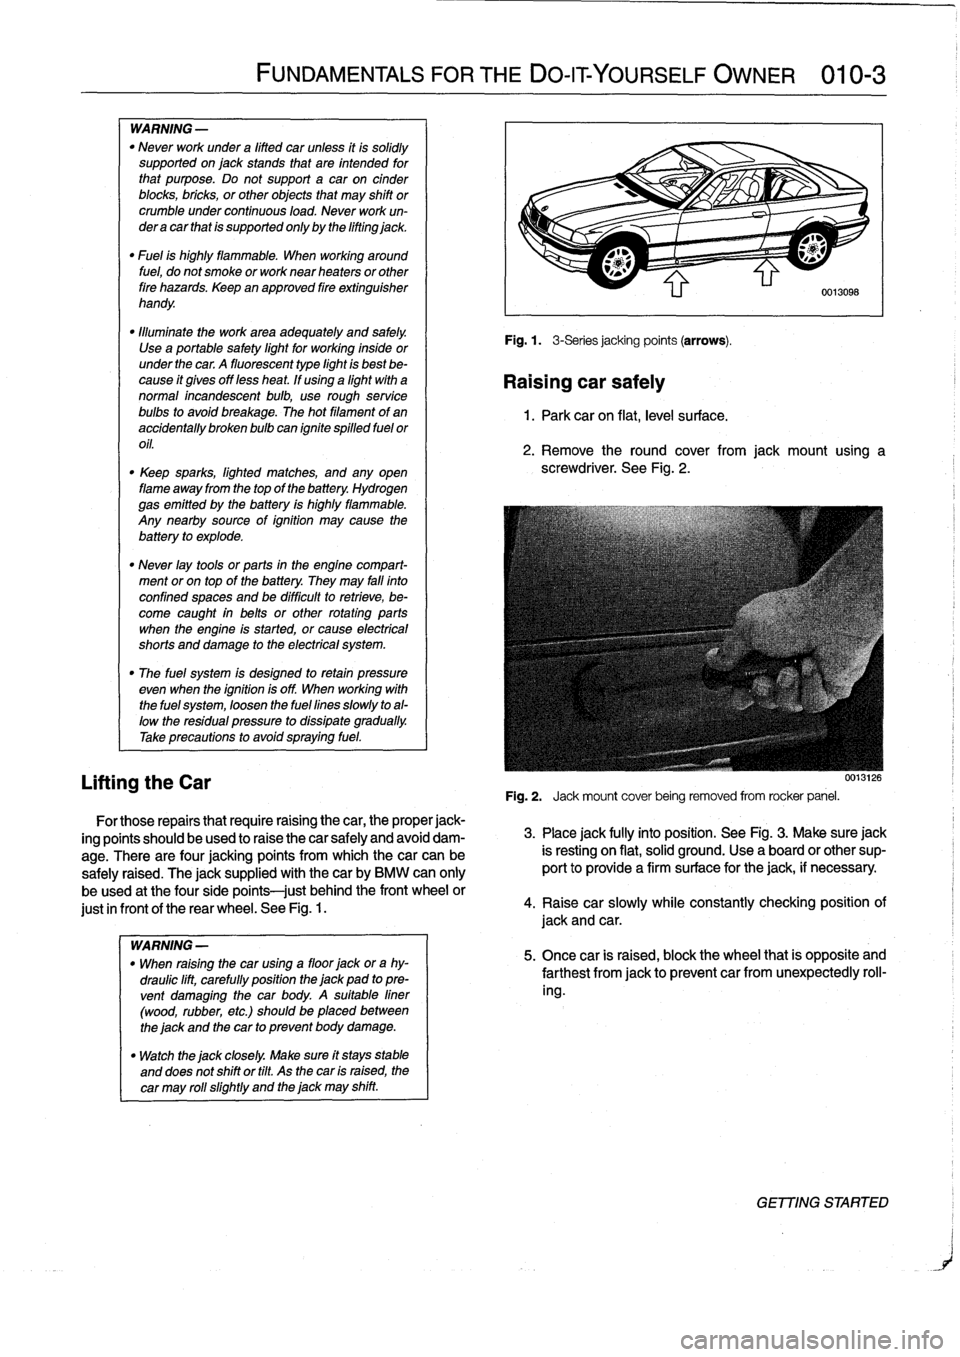 BMW 325i 1994 E36 Workshop Manual 
WARNING
-

"
Never
work
under
a
lifted
car
unless
it
is
solidly
supported
on
jack
stands
that
are
intended
for
that
purpose
.
Do
not
support
a
car
on
cinder
blocks,
bricks,
or
other
objects
that
may
